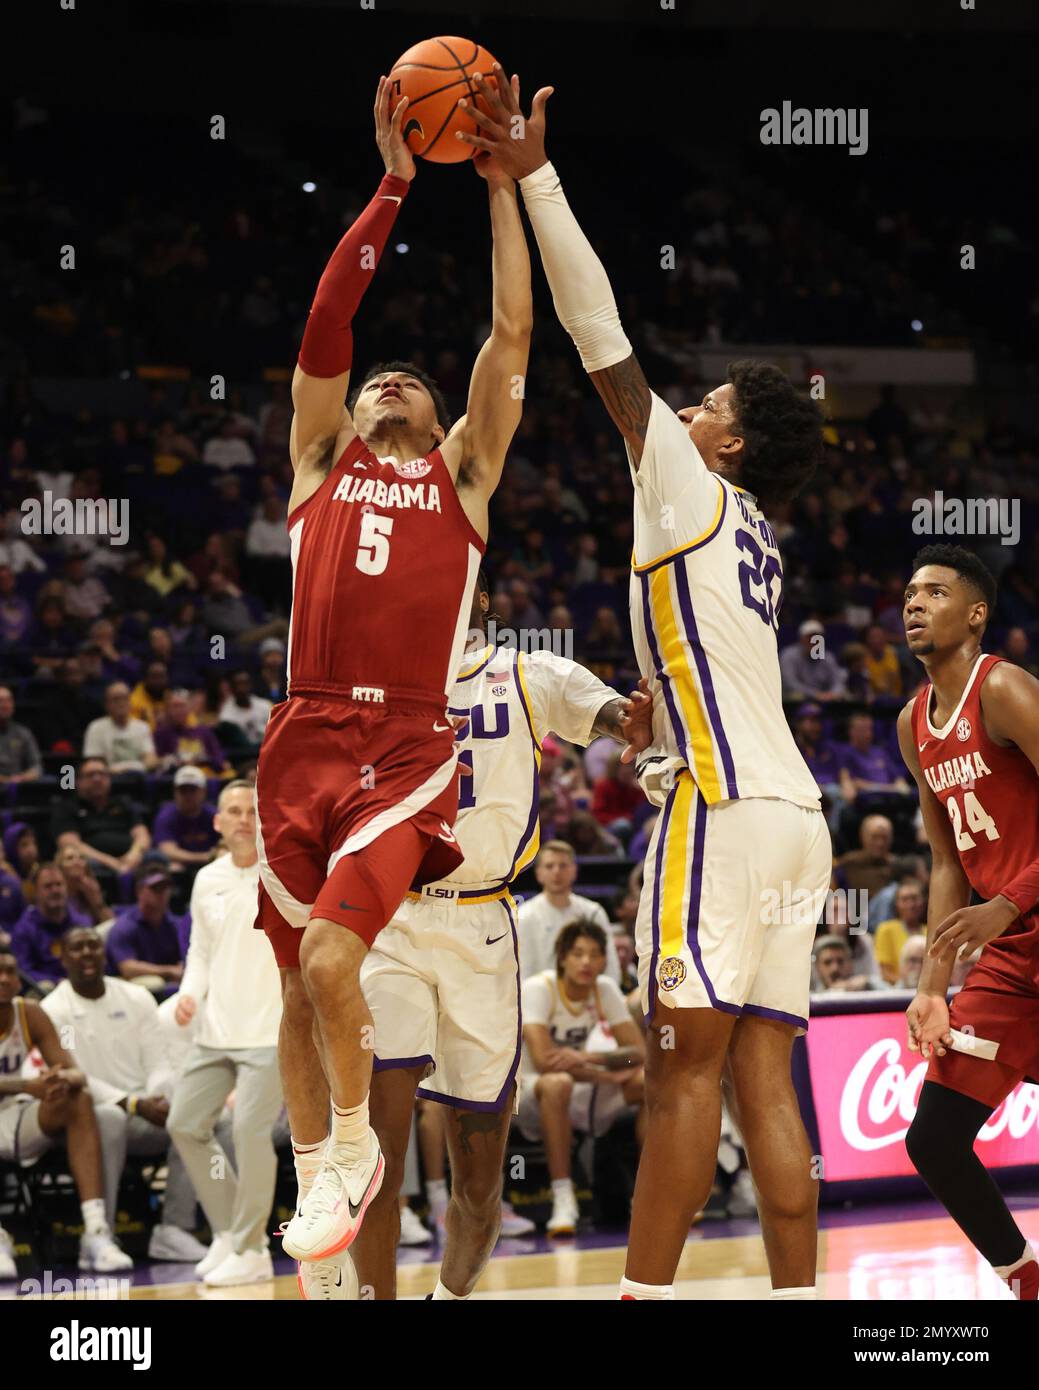 Baton Rouge, USA. 04th Feb, 2023. LSU Tigers forward Derek Fountain (20) blocks Alabama Crimson Tide guard Jahvon Quinerly (5) shot during a men's college basketball game at the Pete Maravich Assembly Center in Baton Rouge, Louisiana on Saturday, February 4, 2023. (Photo by Peter G. Forest/Sipa USA) Credit: Sipa USA/Alamy Live News Stock Photo